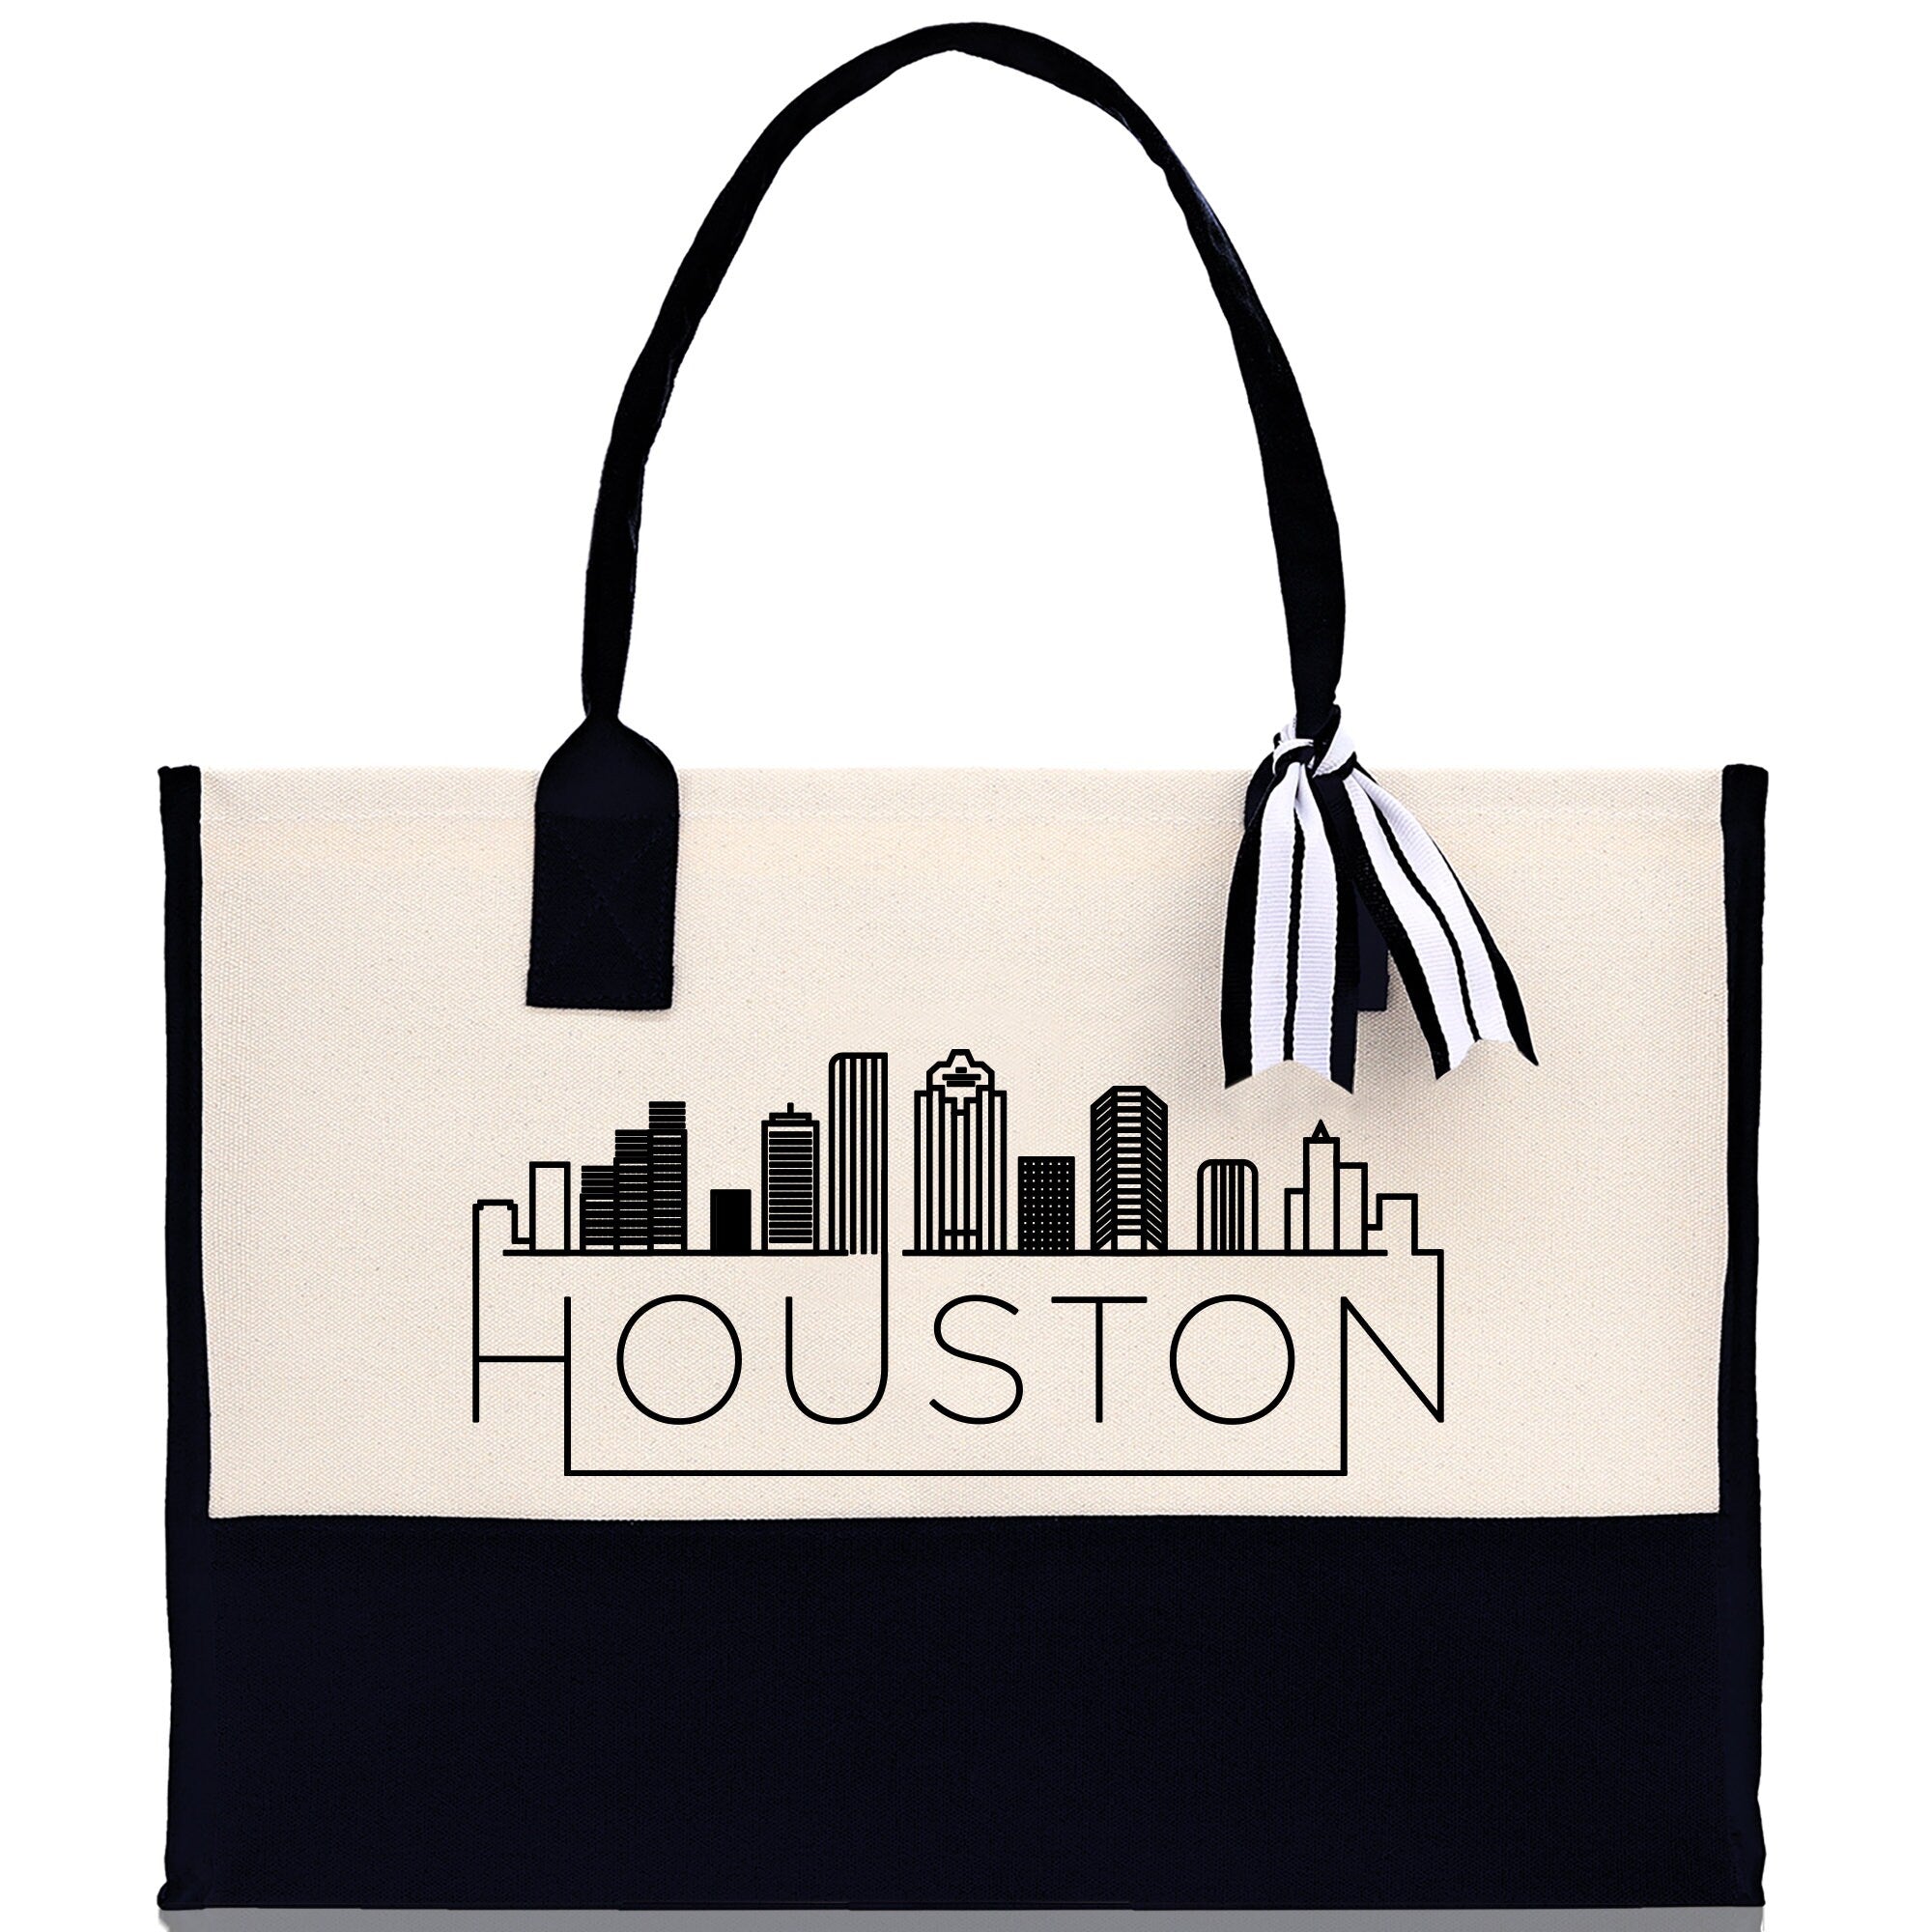 Houston Cotton Canvas Tote Bag TX Travel Vacation Tote Employee and Client Gift Wedding Favor Birthday Welcome Tote Bag Bridesmaid Gift